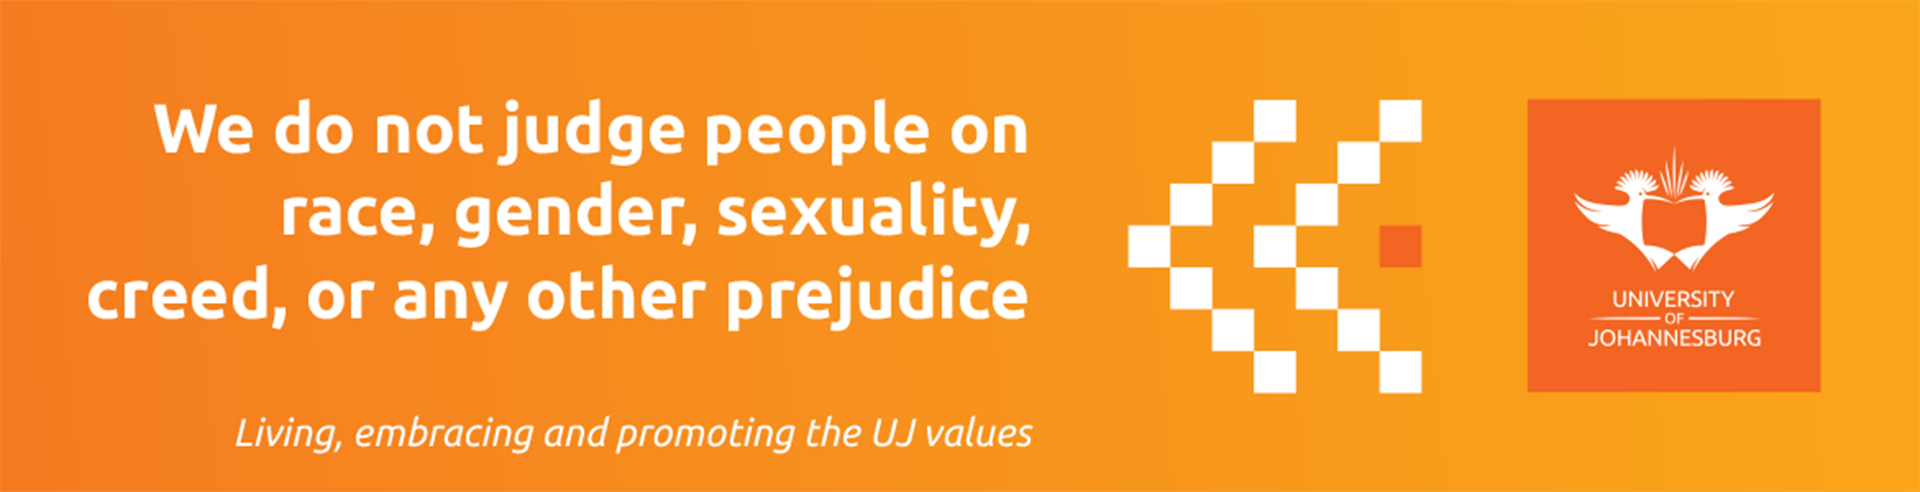 Uj Values Expressions Posters 2020 Ulink 1170x300mm 19